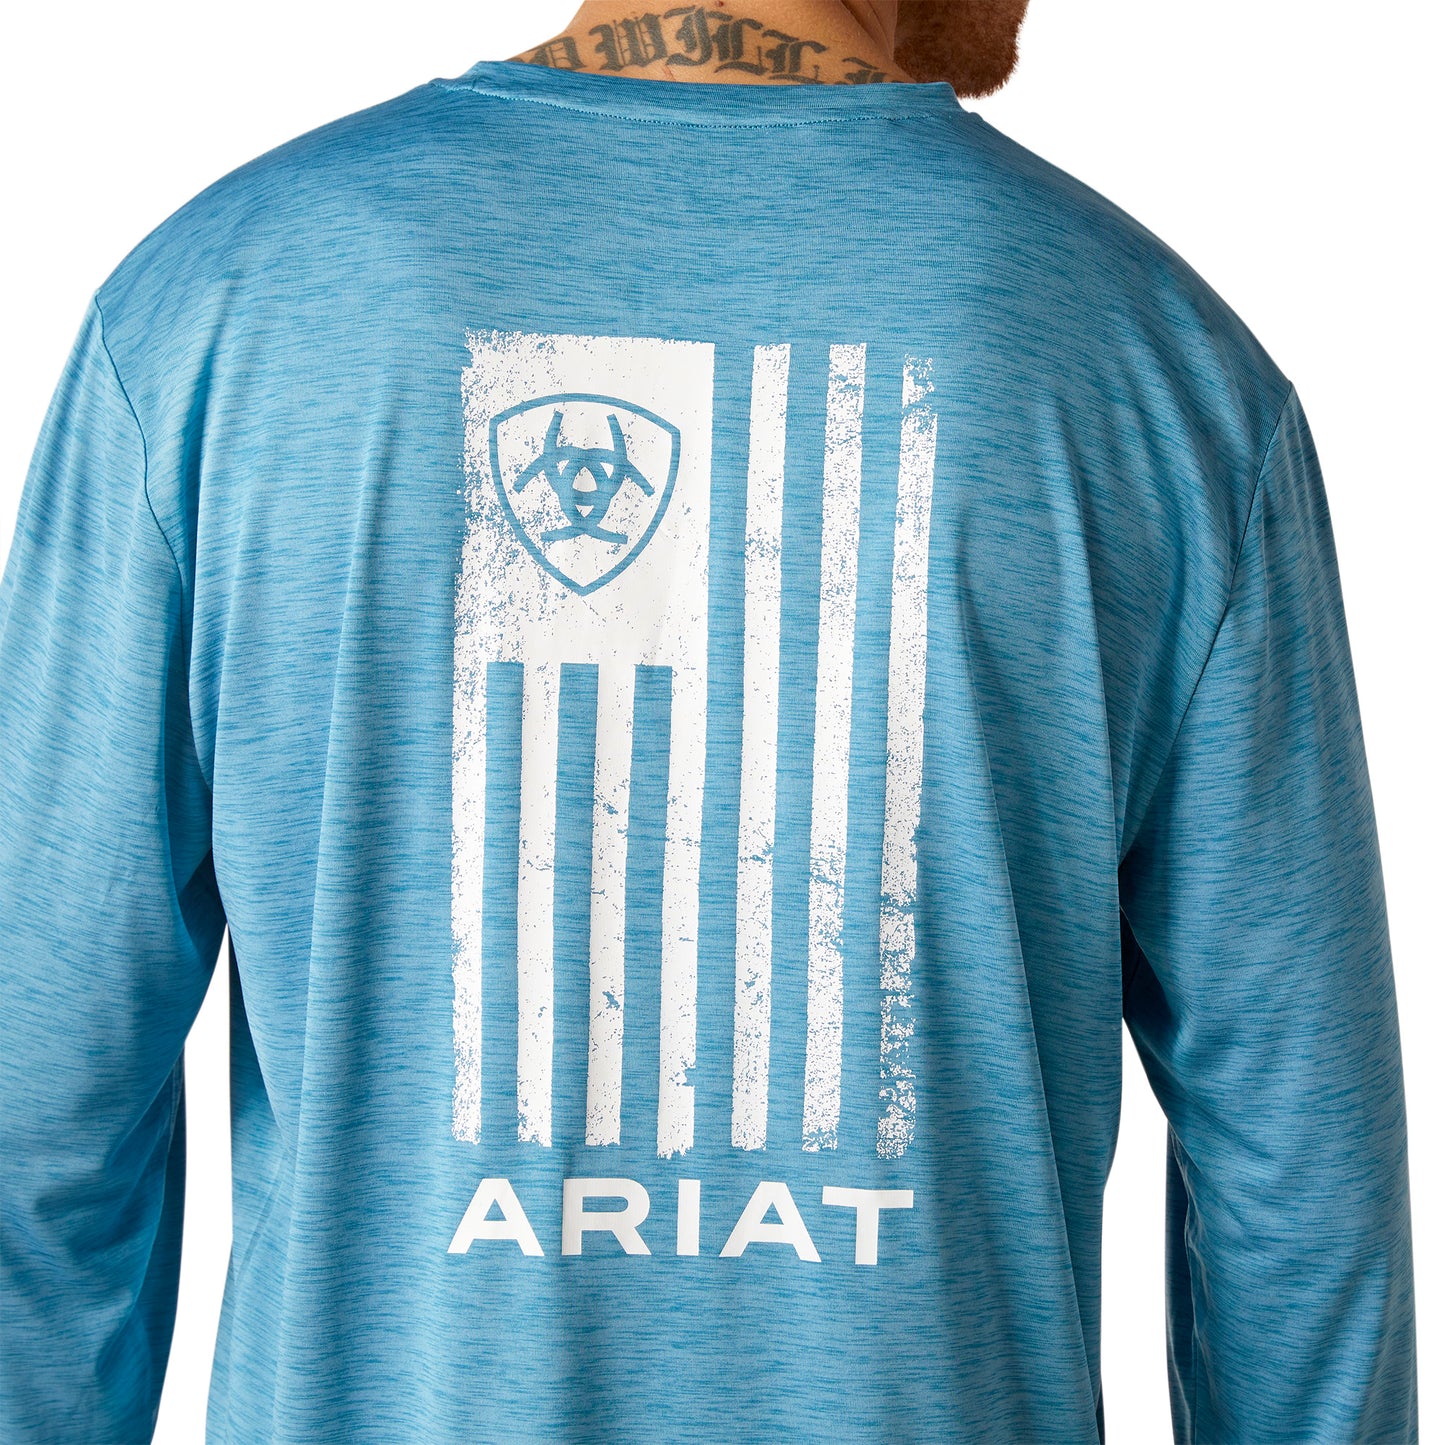 Ariat Mens Seaport Heather Charger Faded T-Shirt